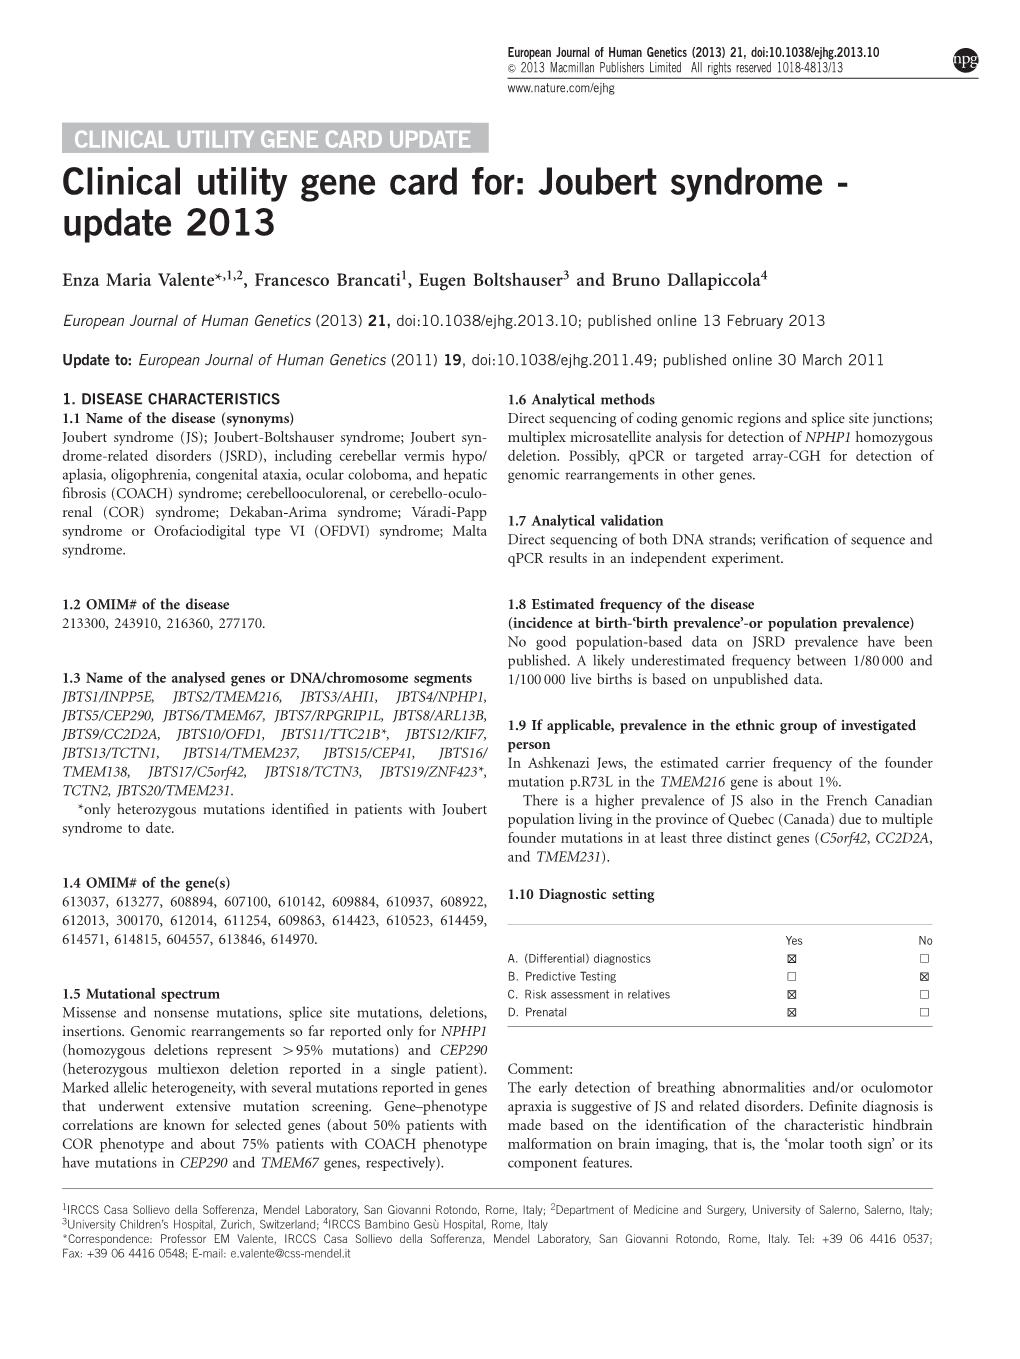 Clinical Utility Gene Card For: Joubert Syndrome - Update 2013